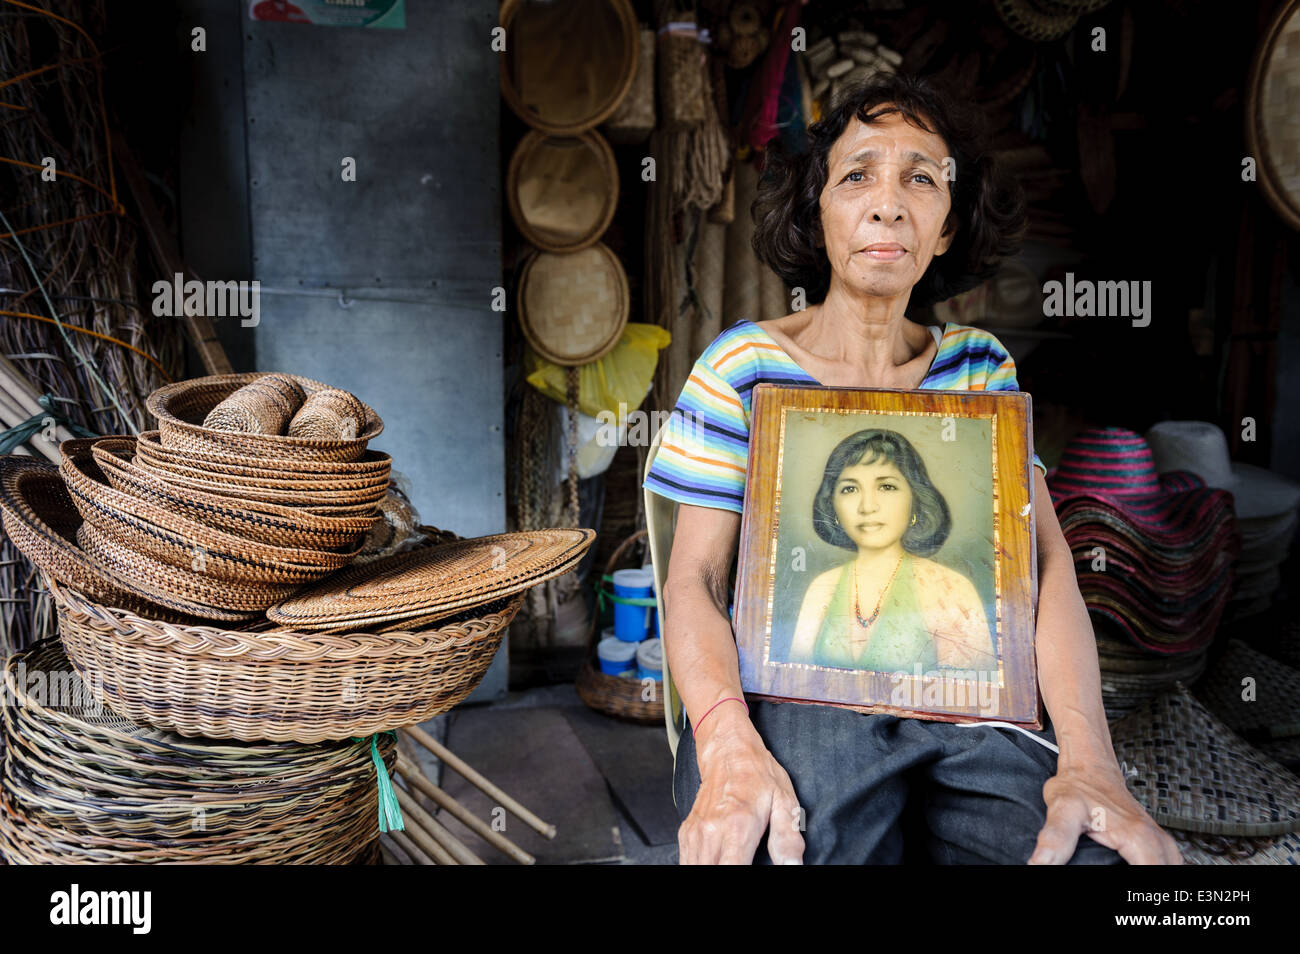 Woman with her own portrait, Philipppines Stock Photo